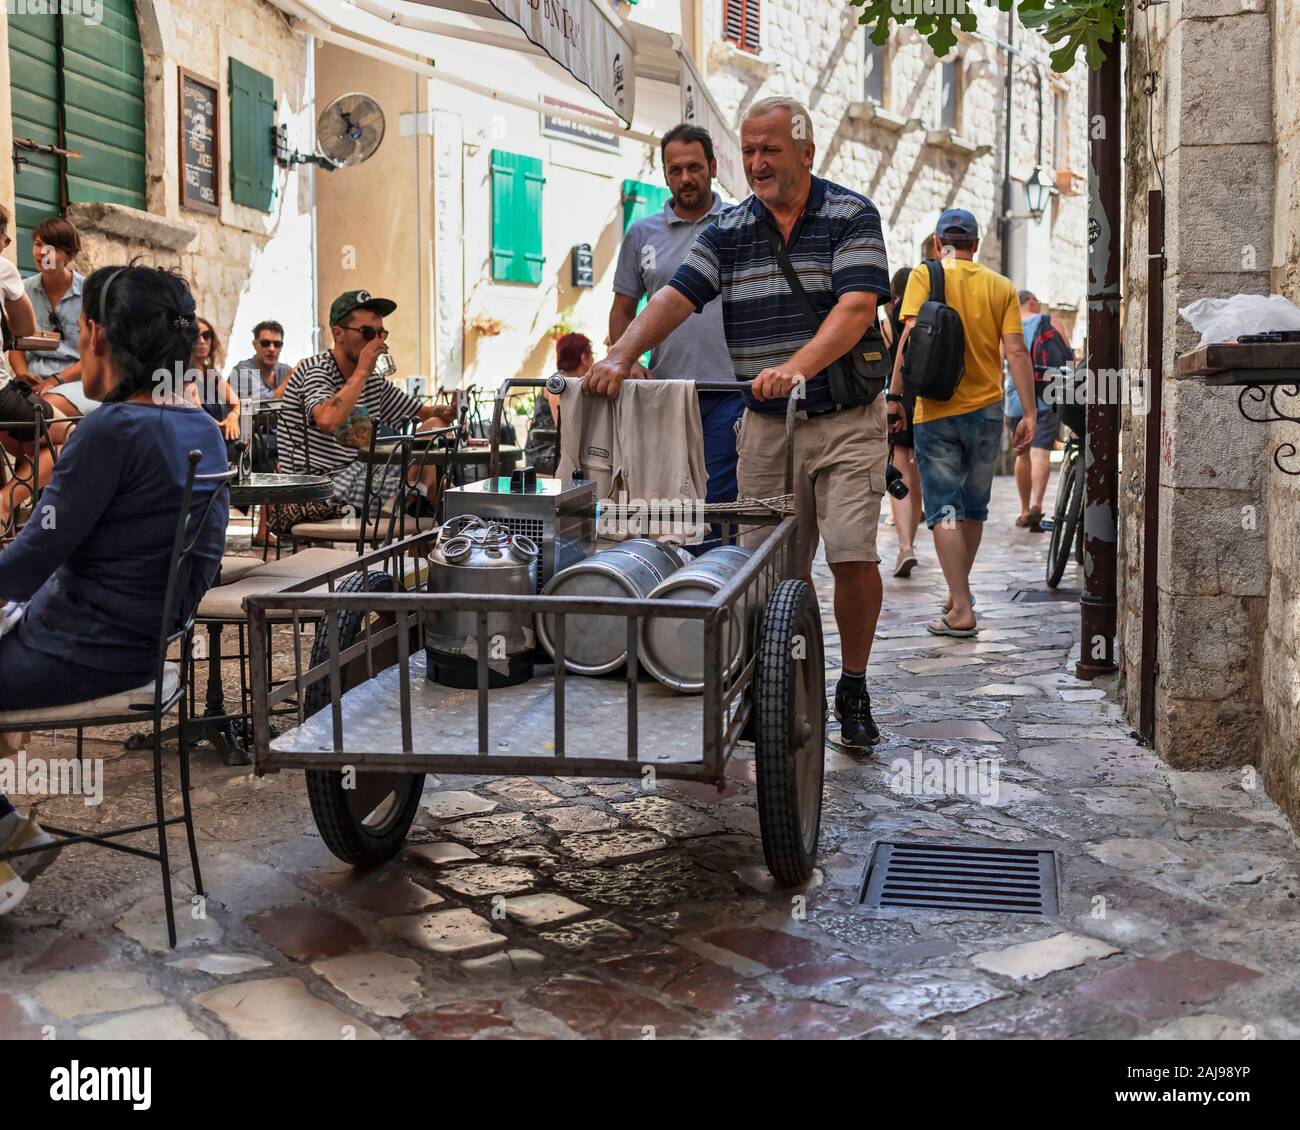 Montenegro, Sep 21, 2019: Street scene with a local man delivering beer kegs via wheel cart in Kotor Old Town Stock Photo